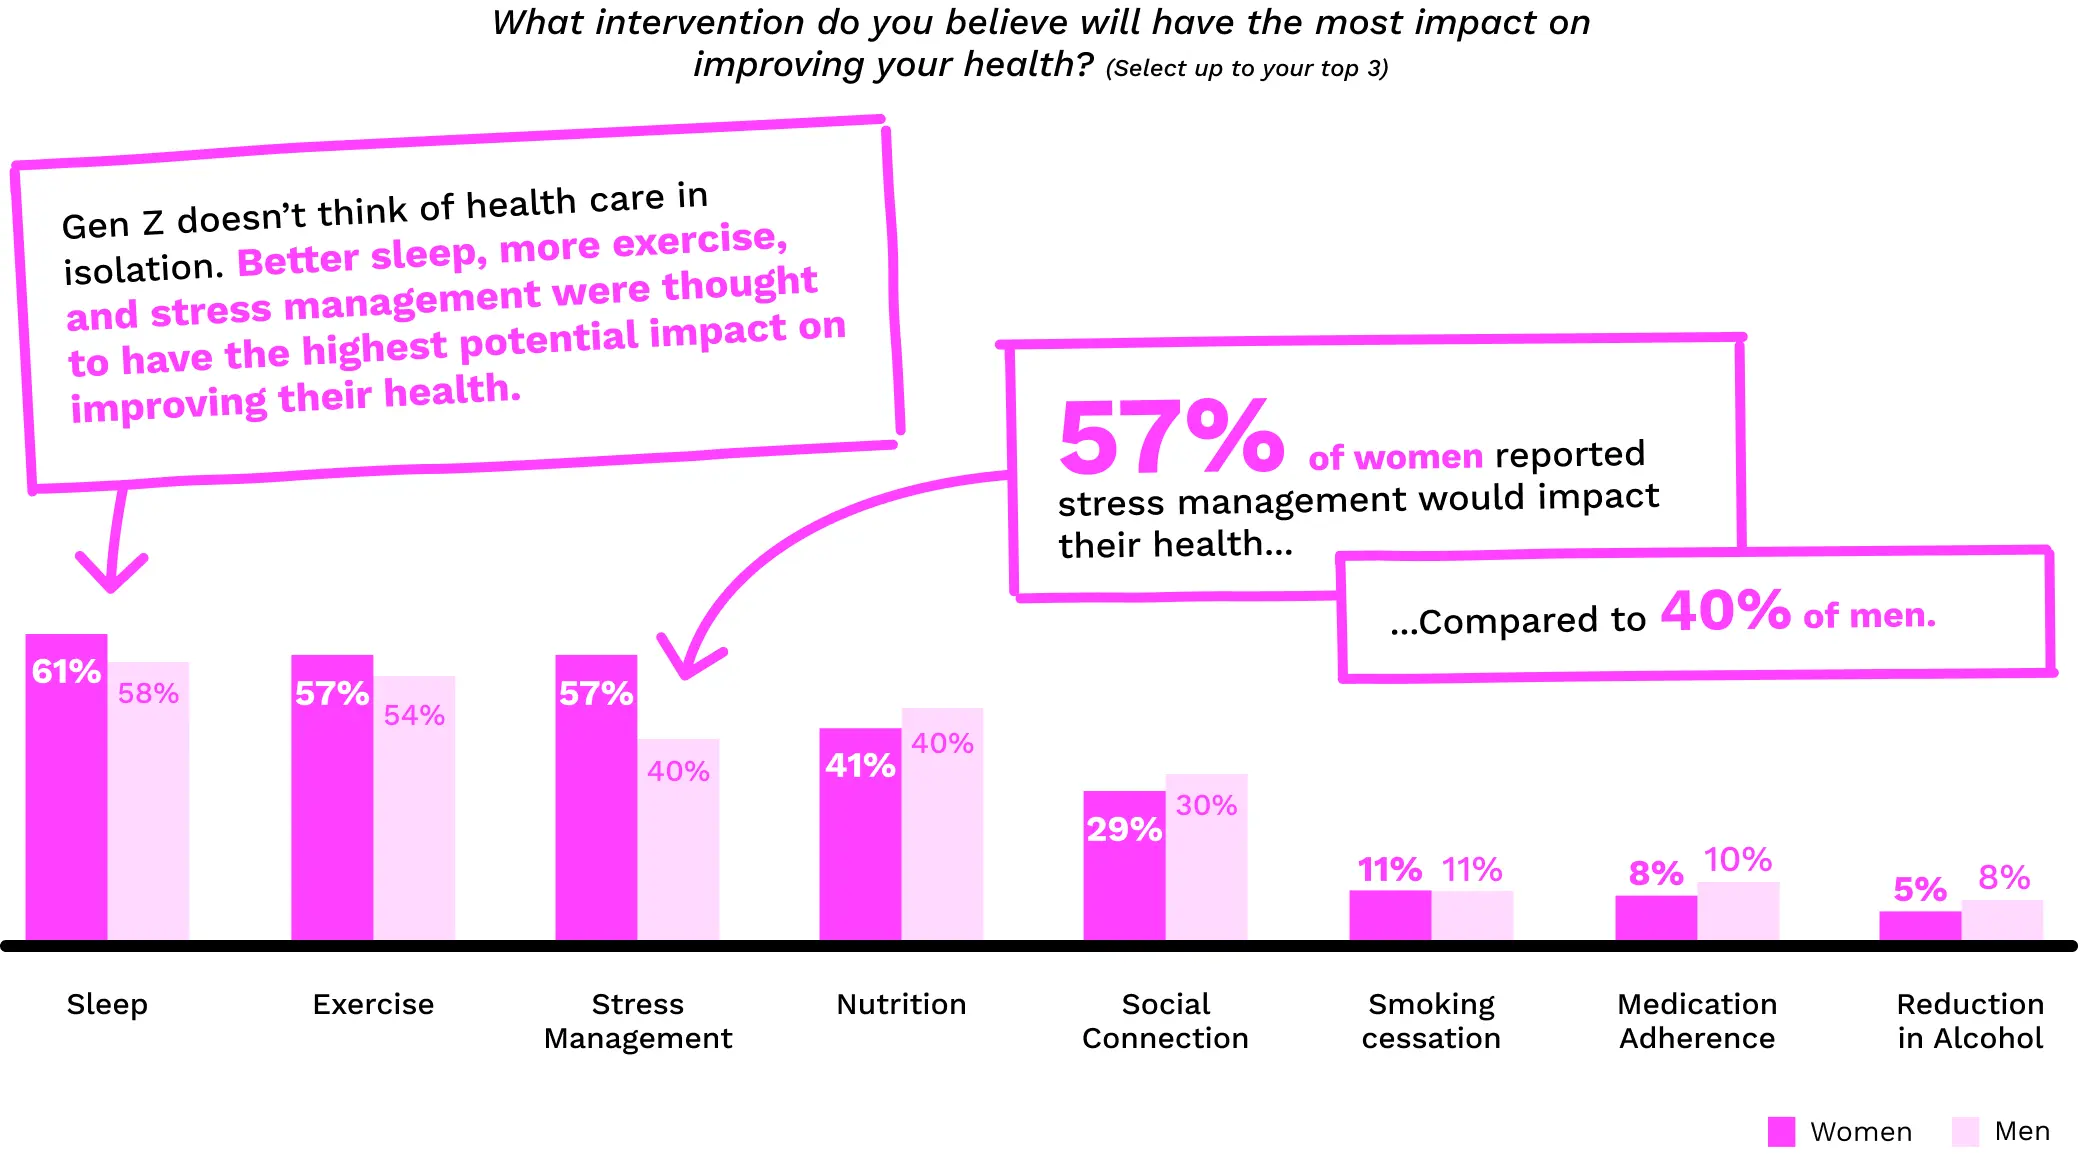 Most impact on improving your health?